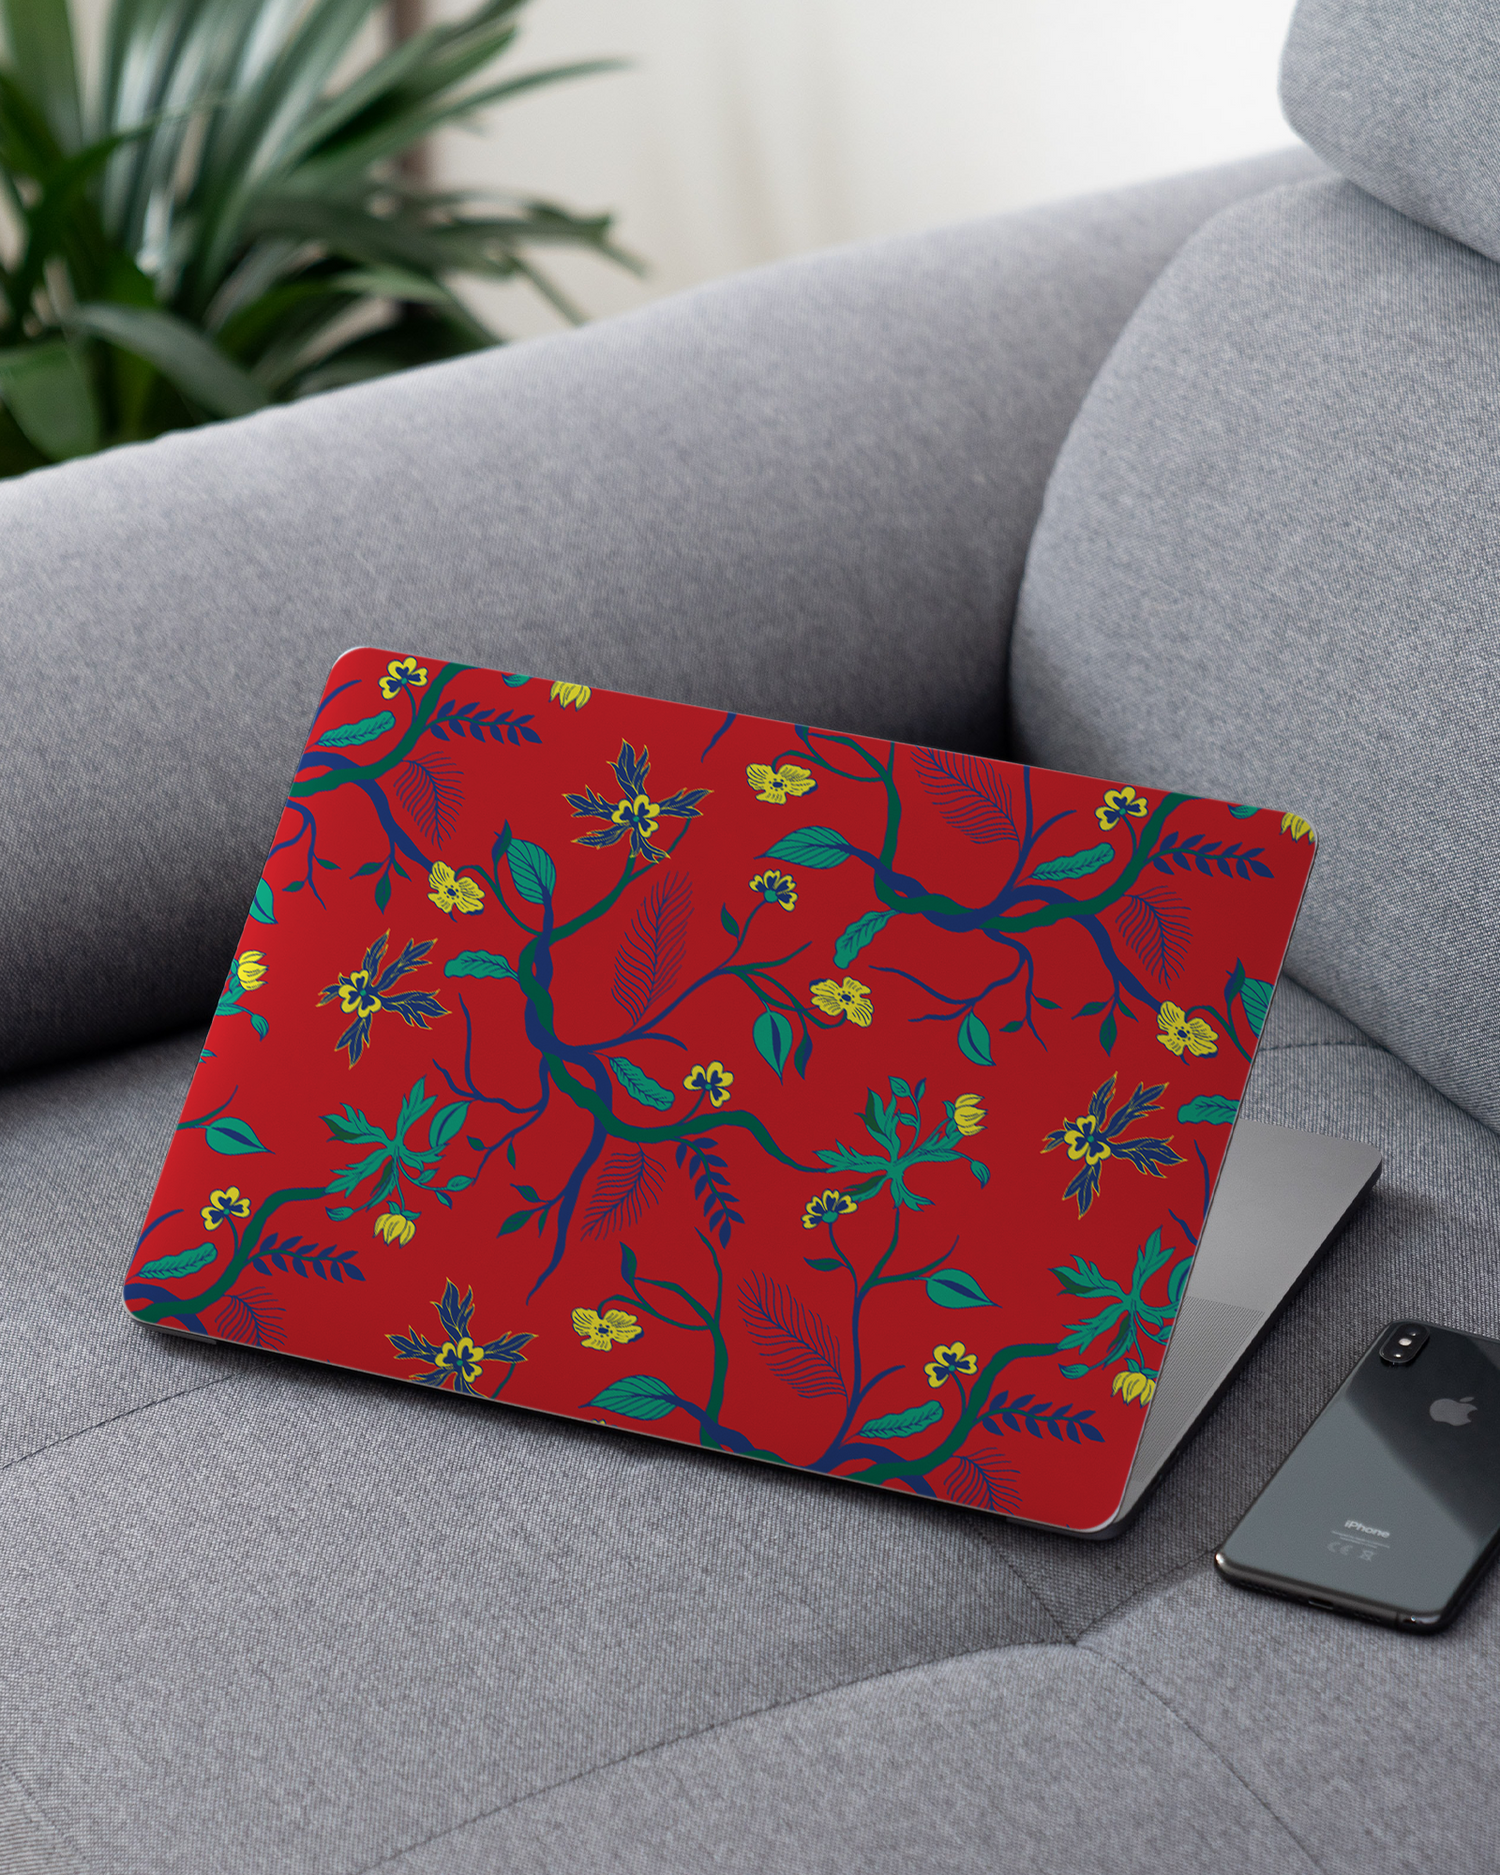 Ultra Red Floral Laptop Skin for 13 inch Apple MacBooks on a couch